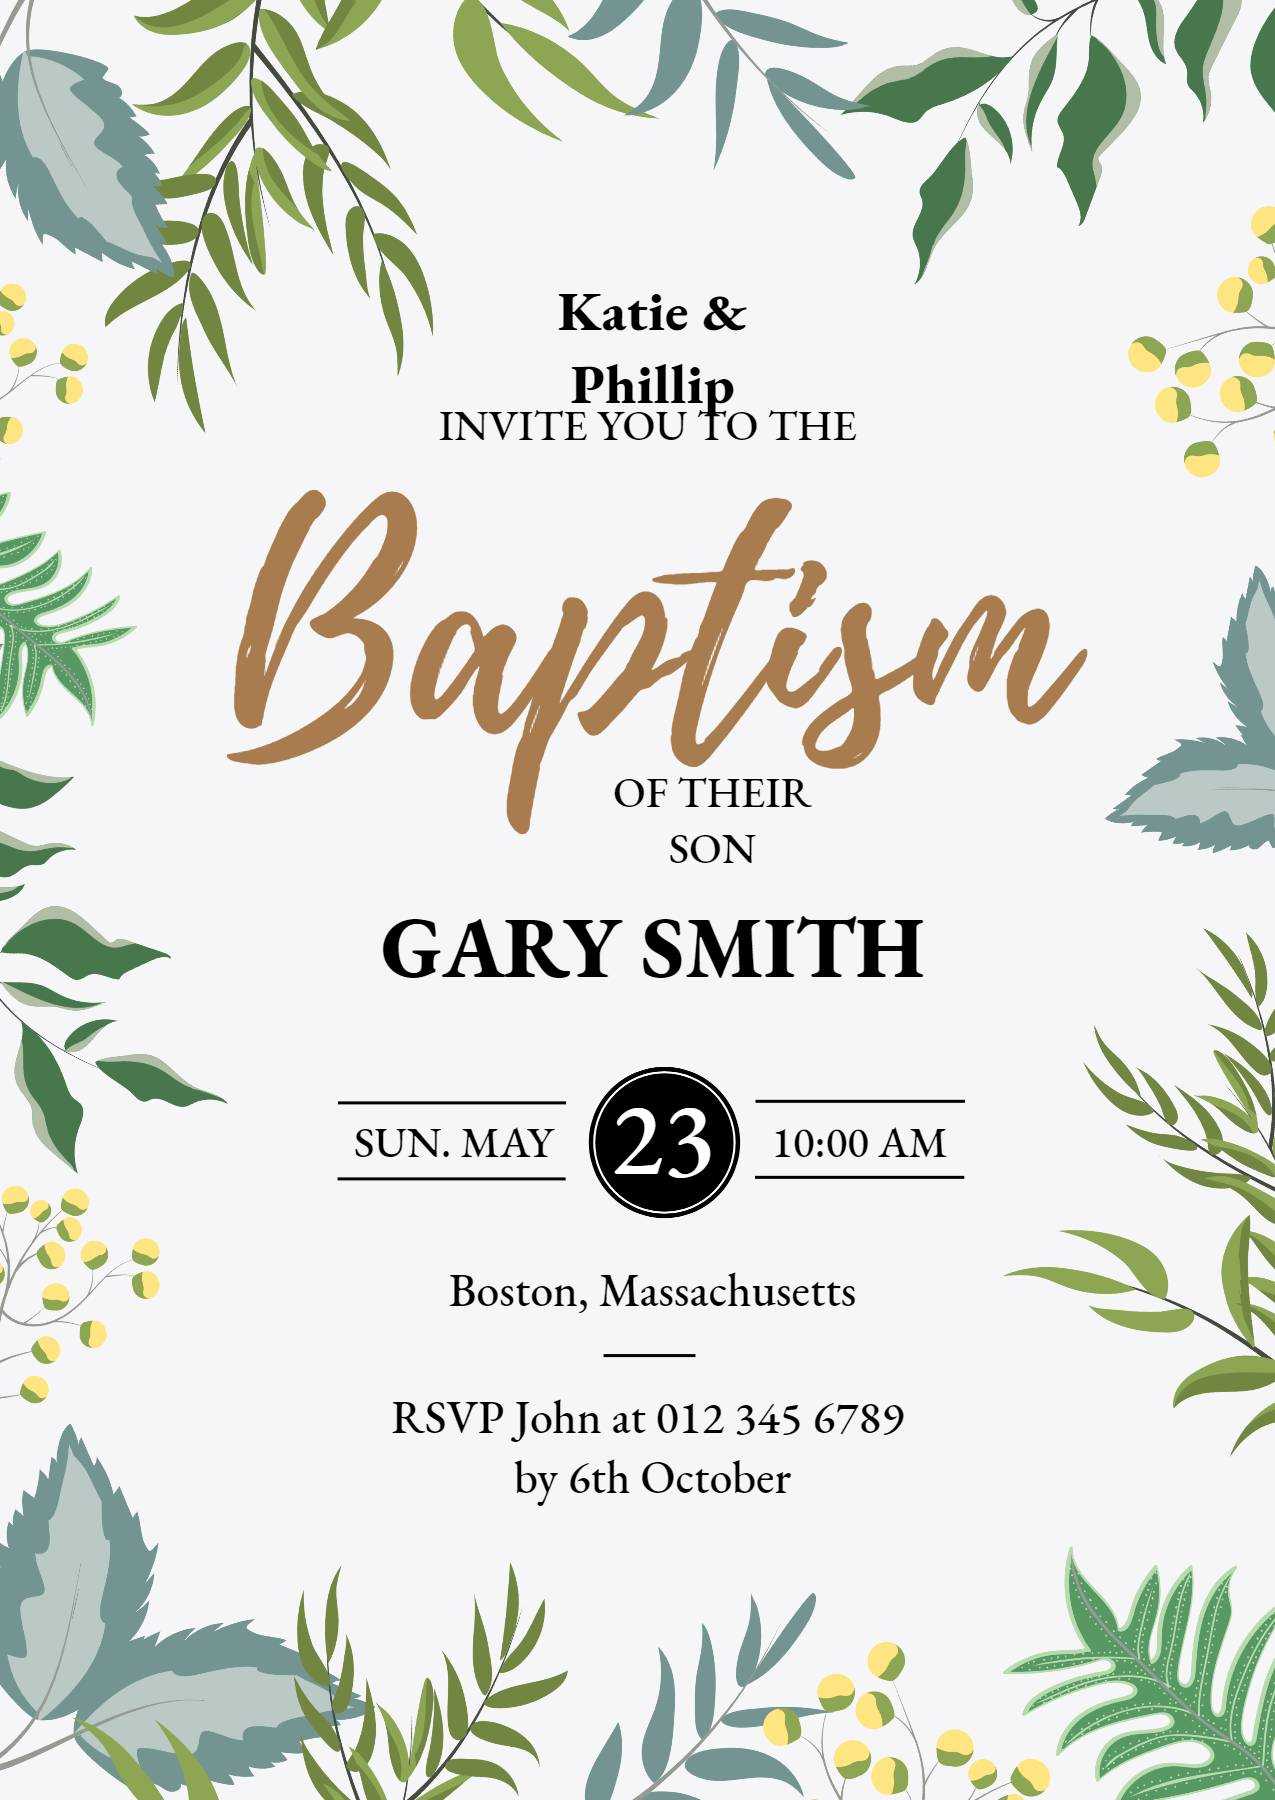 Printable Templates of Baptism Invitations Online (Free) | Fotor